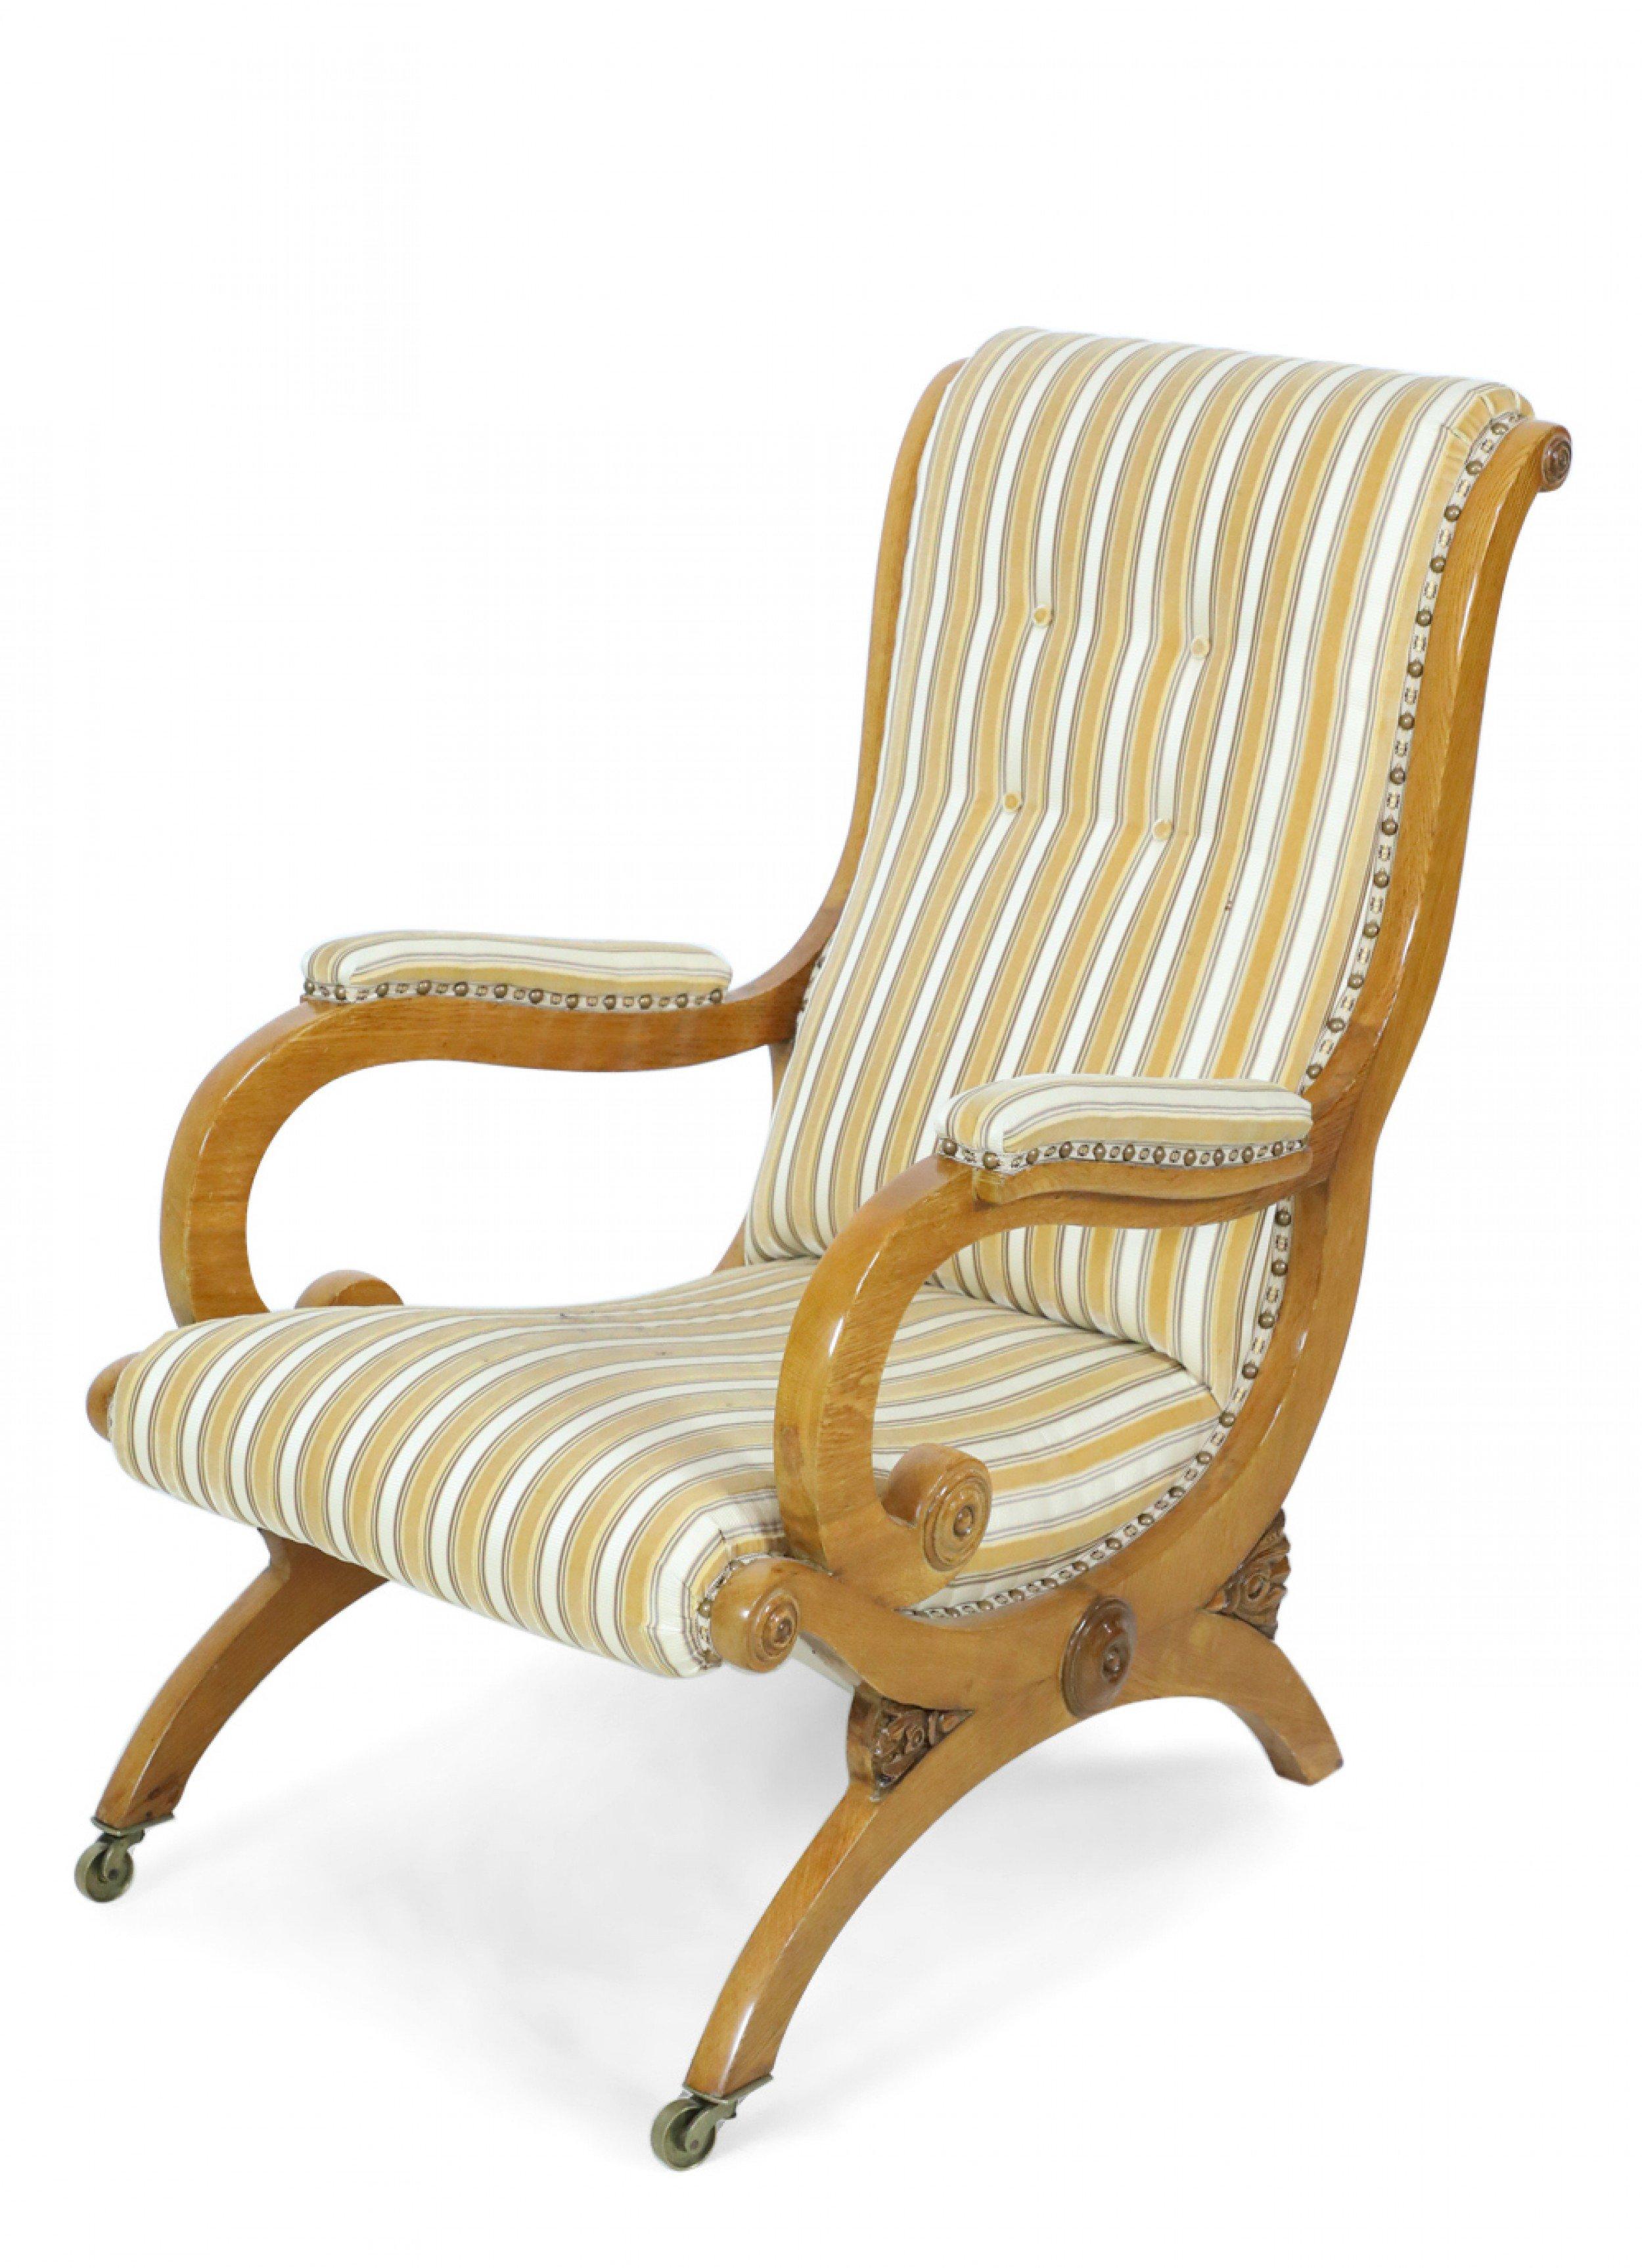 English Victorian Blond Wood Scroll Armchair with Striped Upholstery In Good Condition For Sale In New York, NY